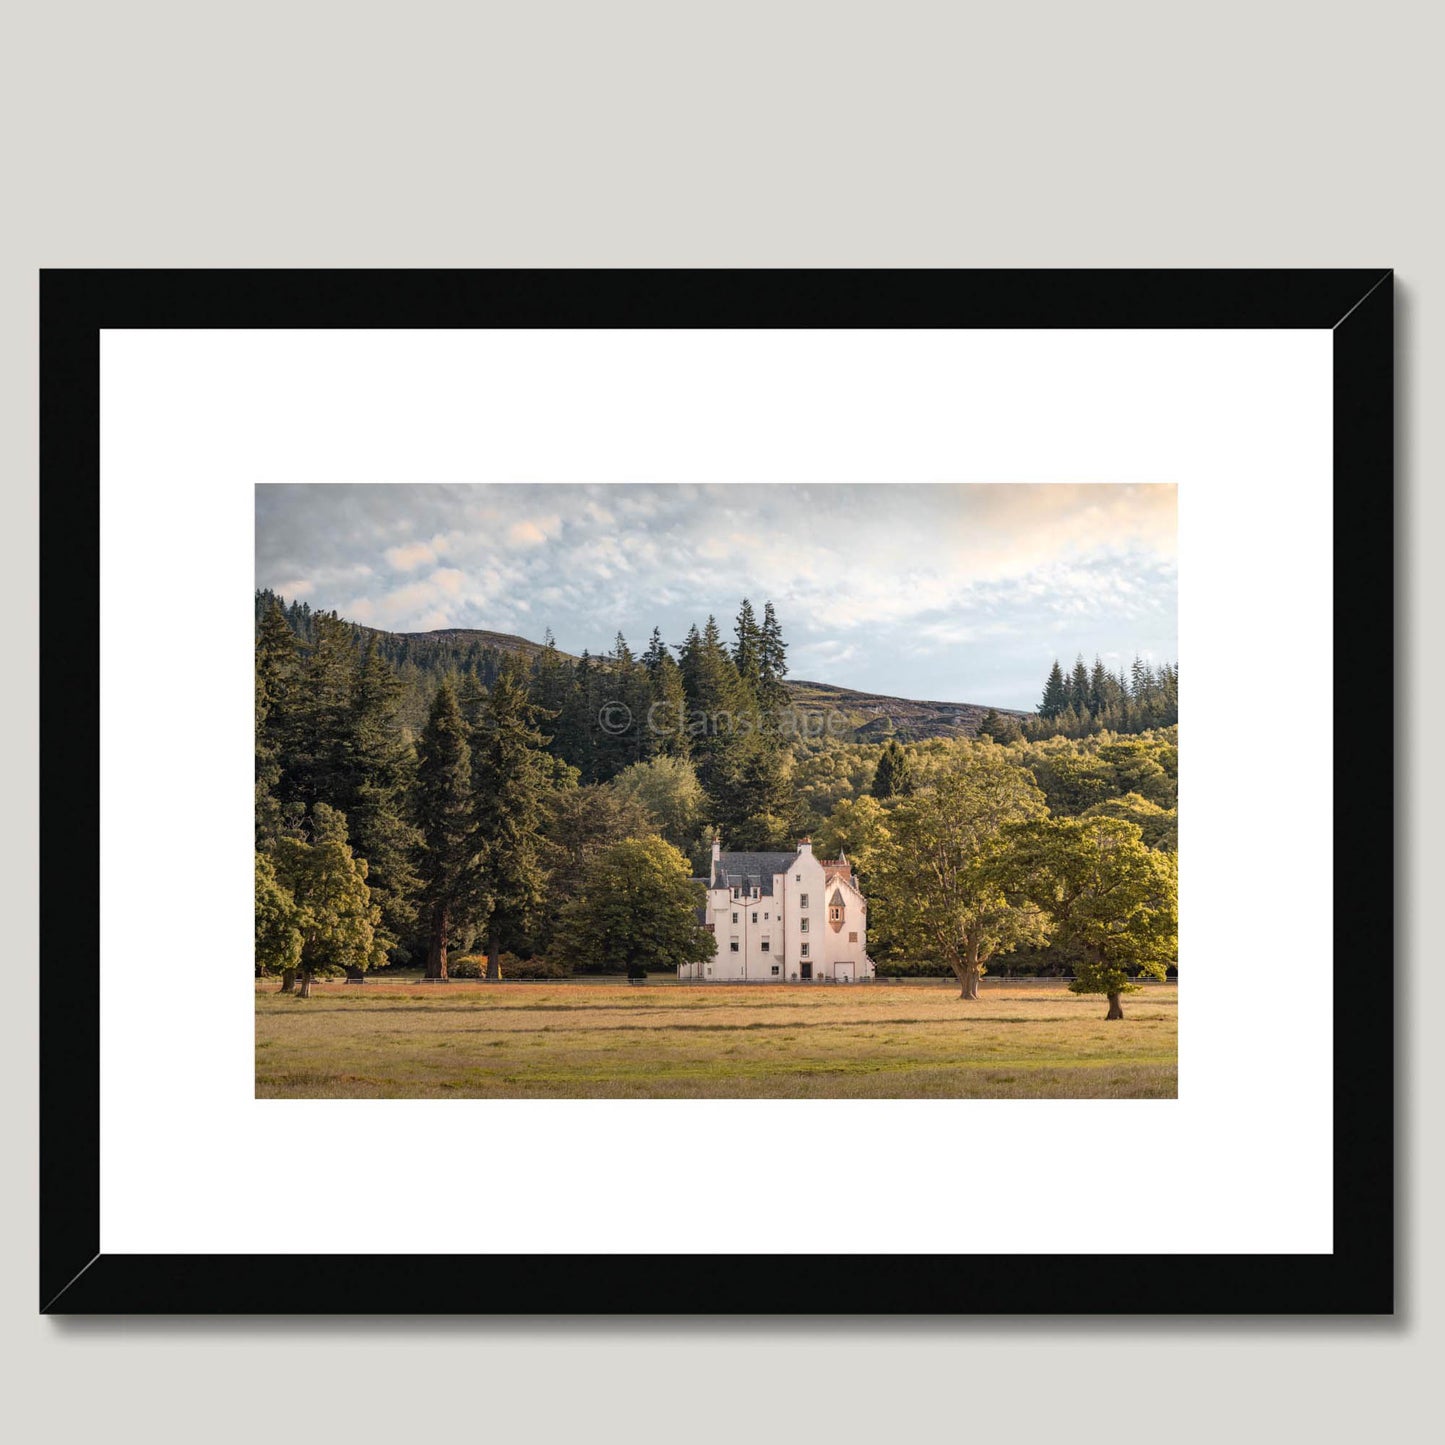 Clan Chisholm - Erchless Castle - Framed & Mounted Photo Print 16"x12" Black